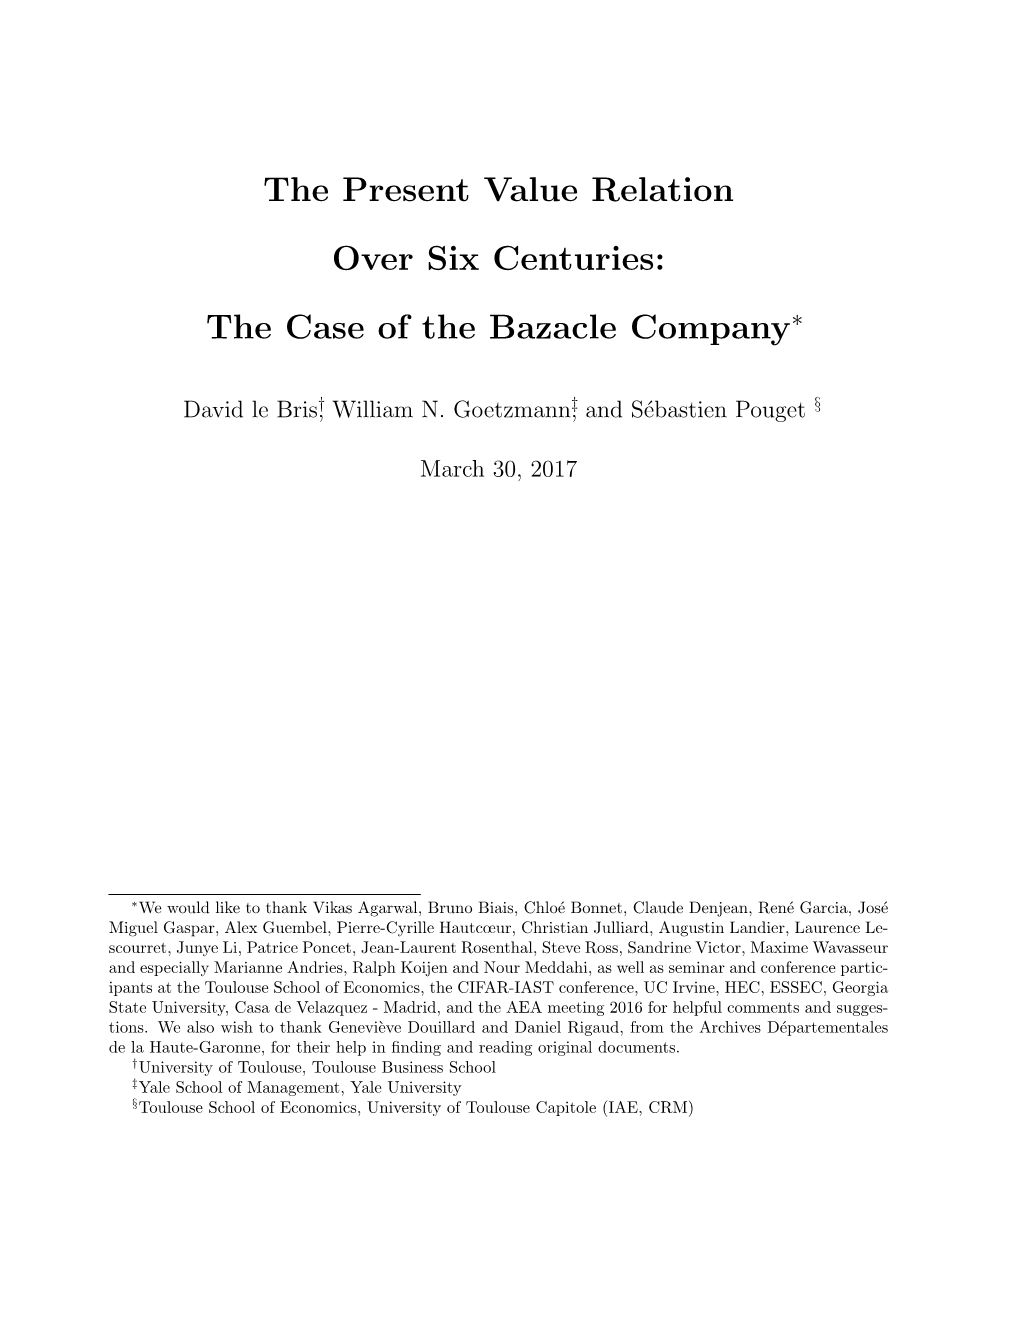 The Present Value Relation Over Six Centuries: the Case of the Bazacle Company∗